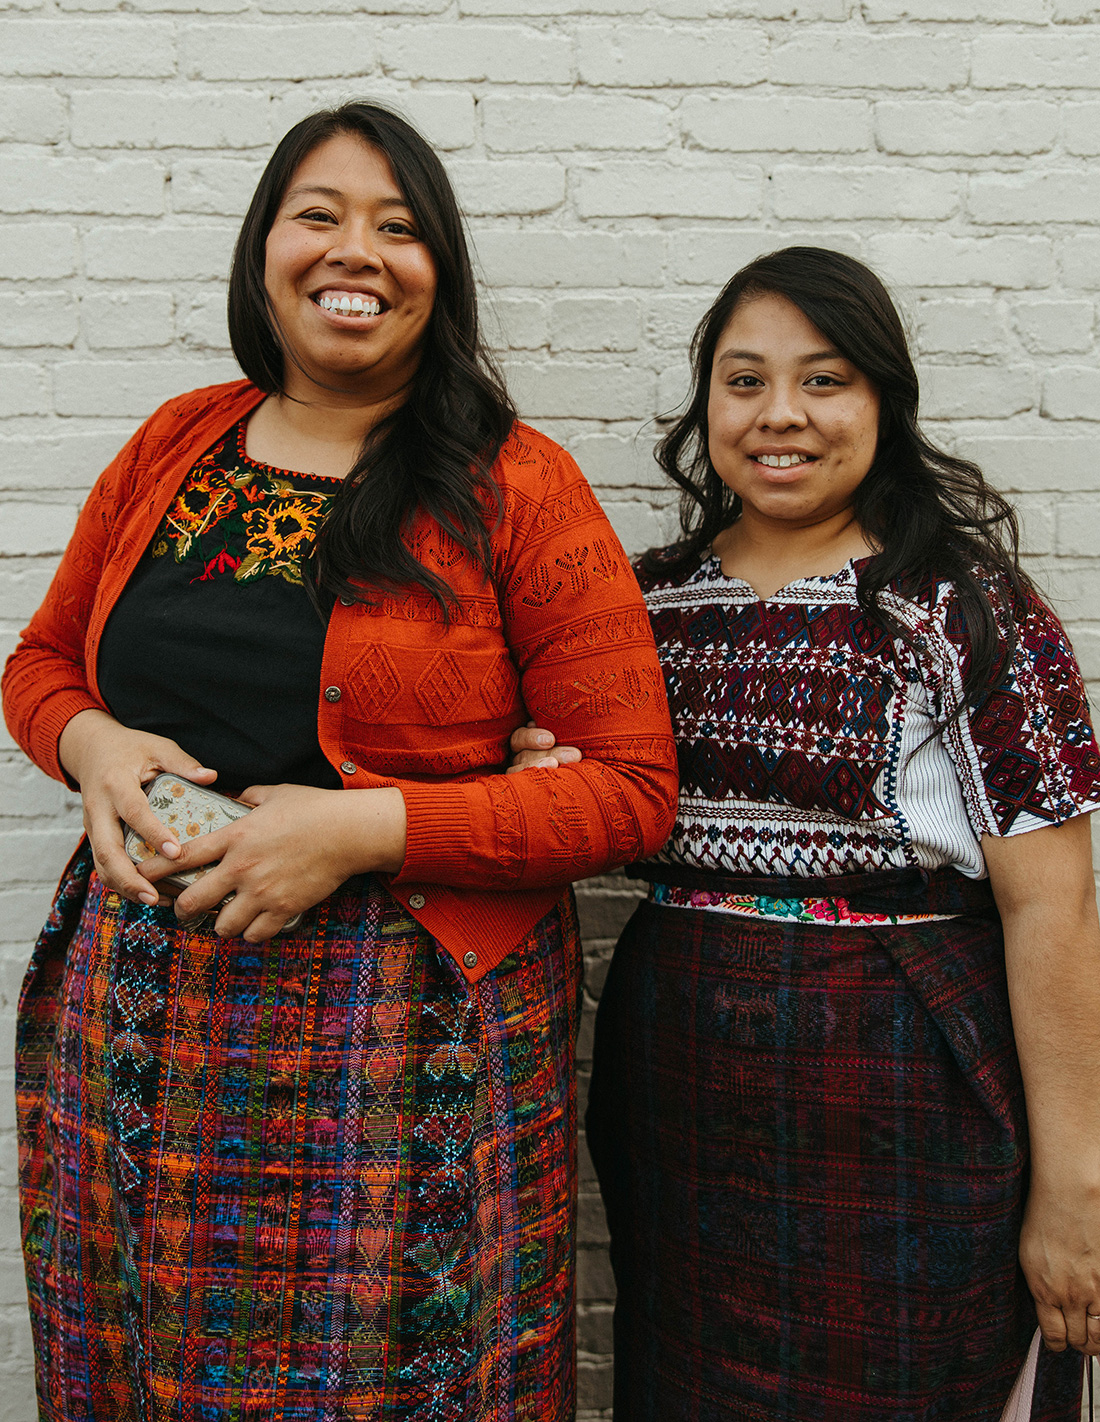 Two dark-haired young women in traditioanl Guatemalan clothing smile and in front of a white brick wall.